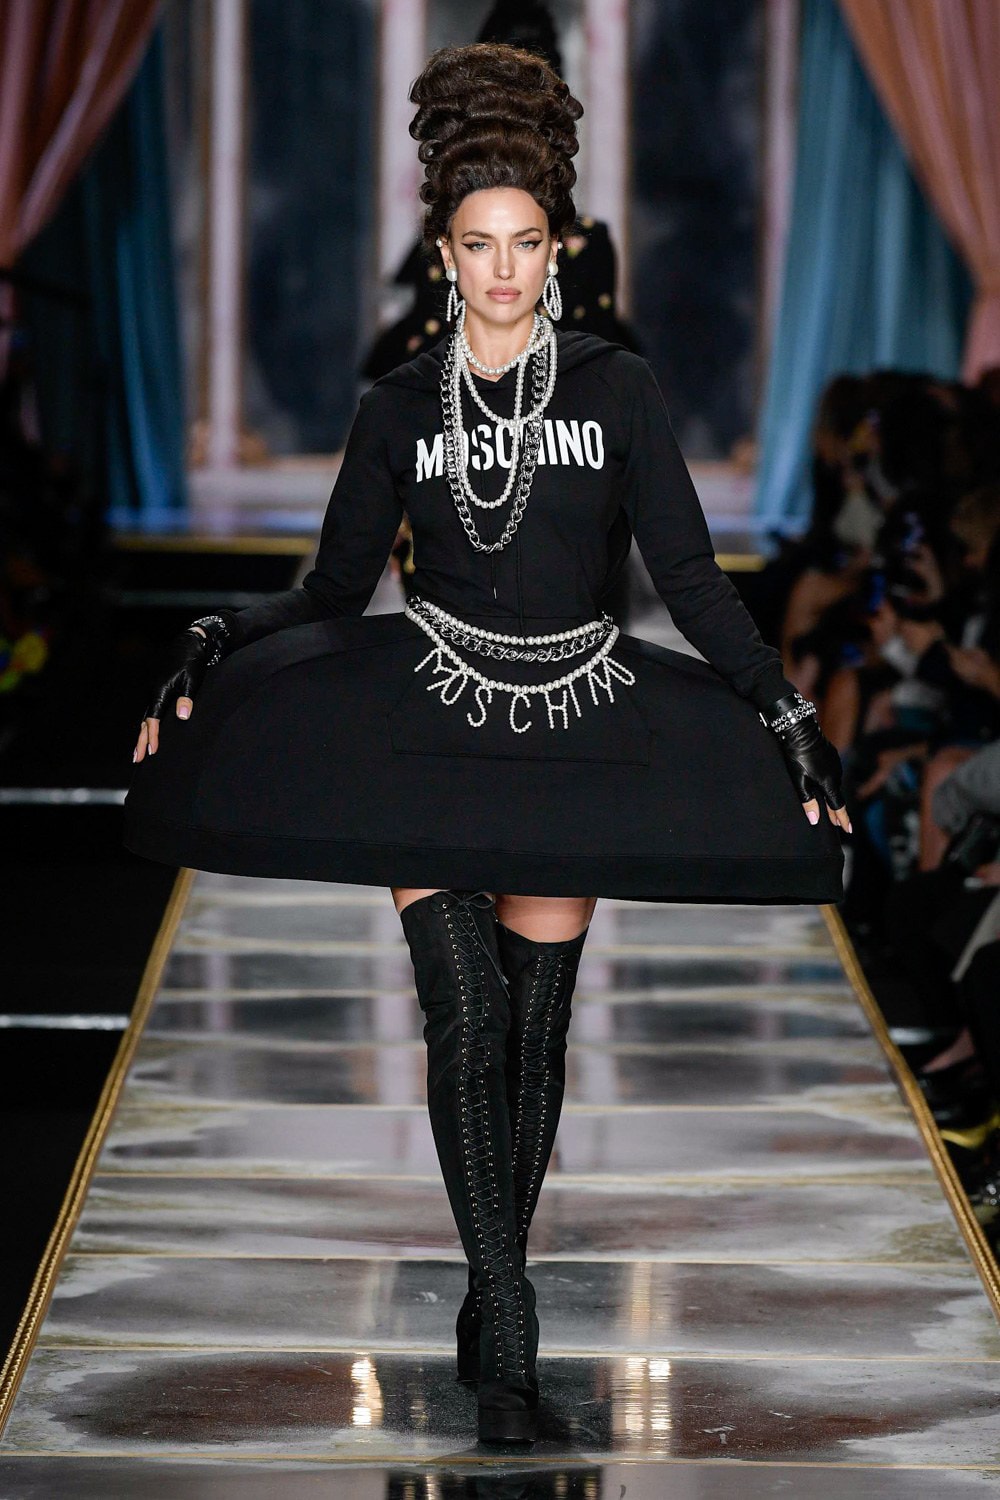 Moschino Fall/Winter 2020 Collection Runway Show Hoodie Dress Black